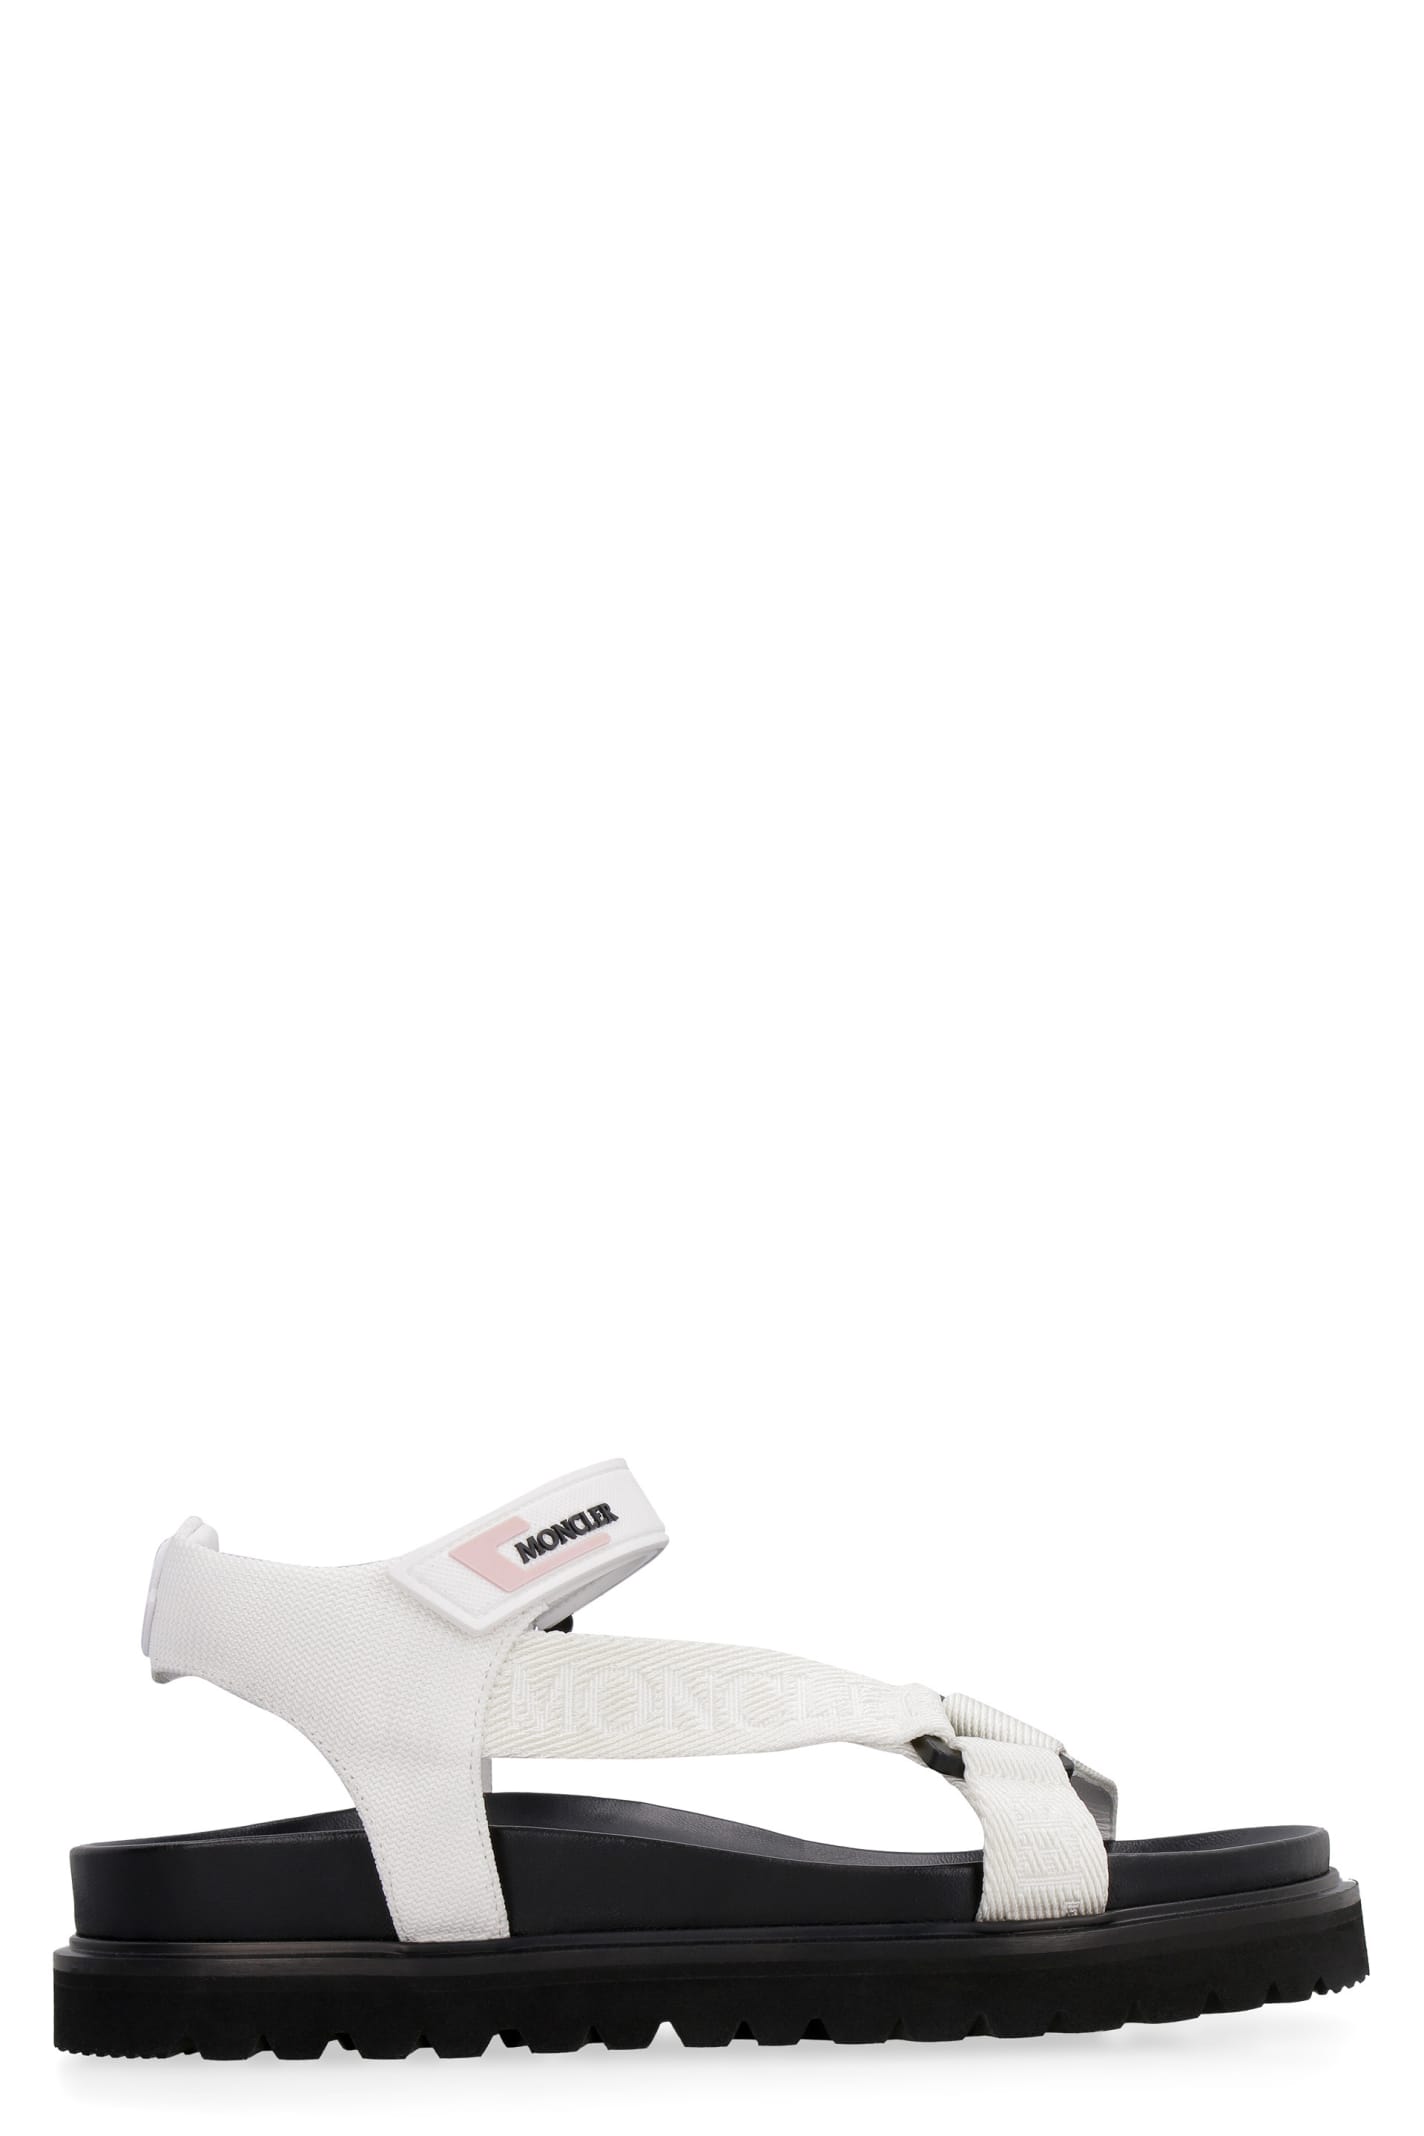 Buy Moncler Flavia Flat Sandals online, shop Moncler shoes with free shipping